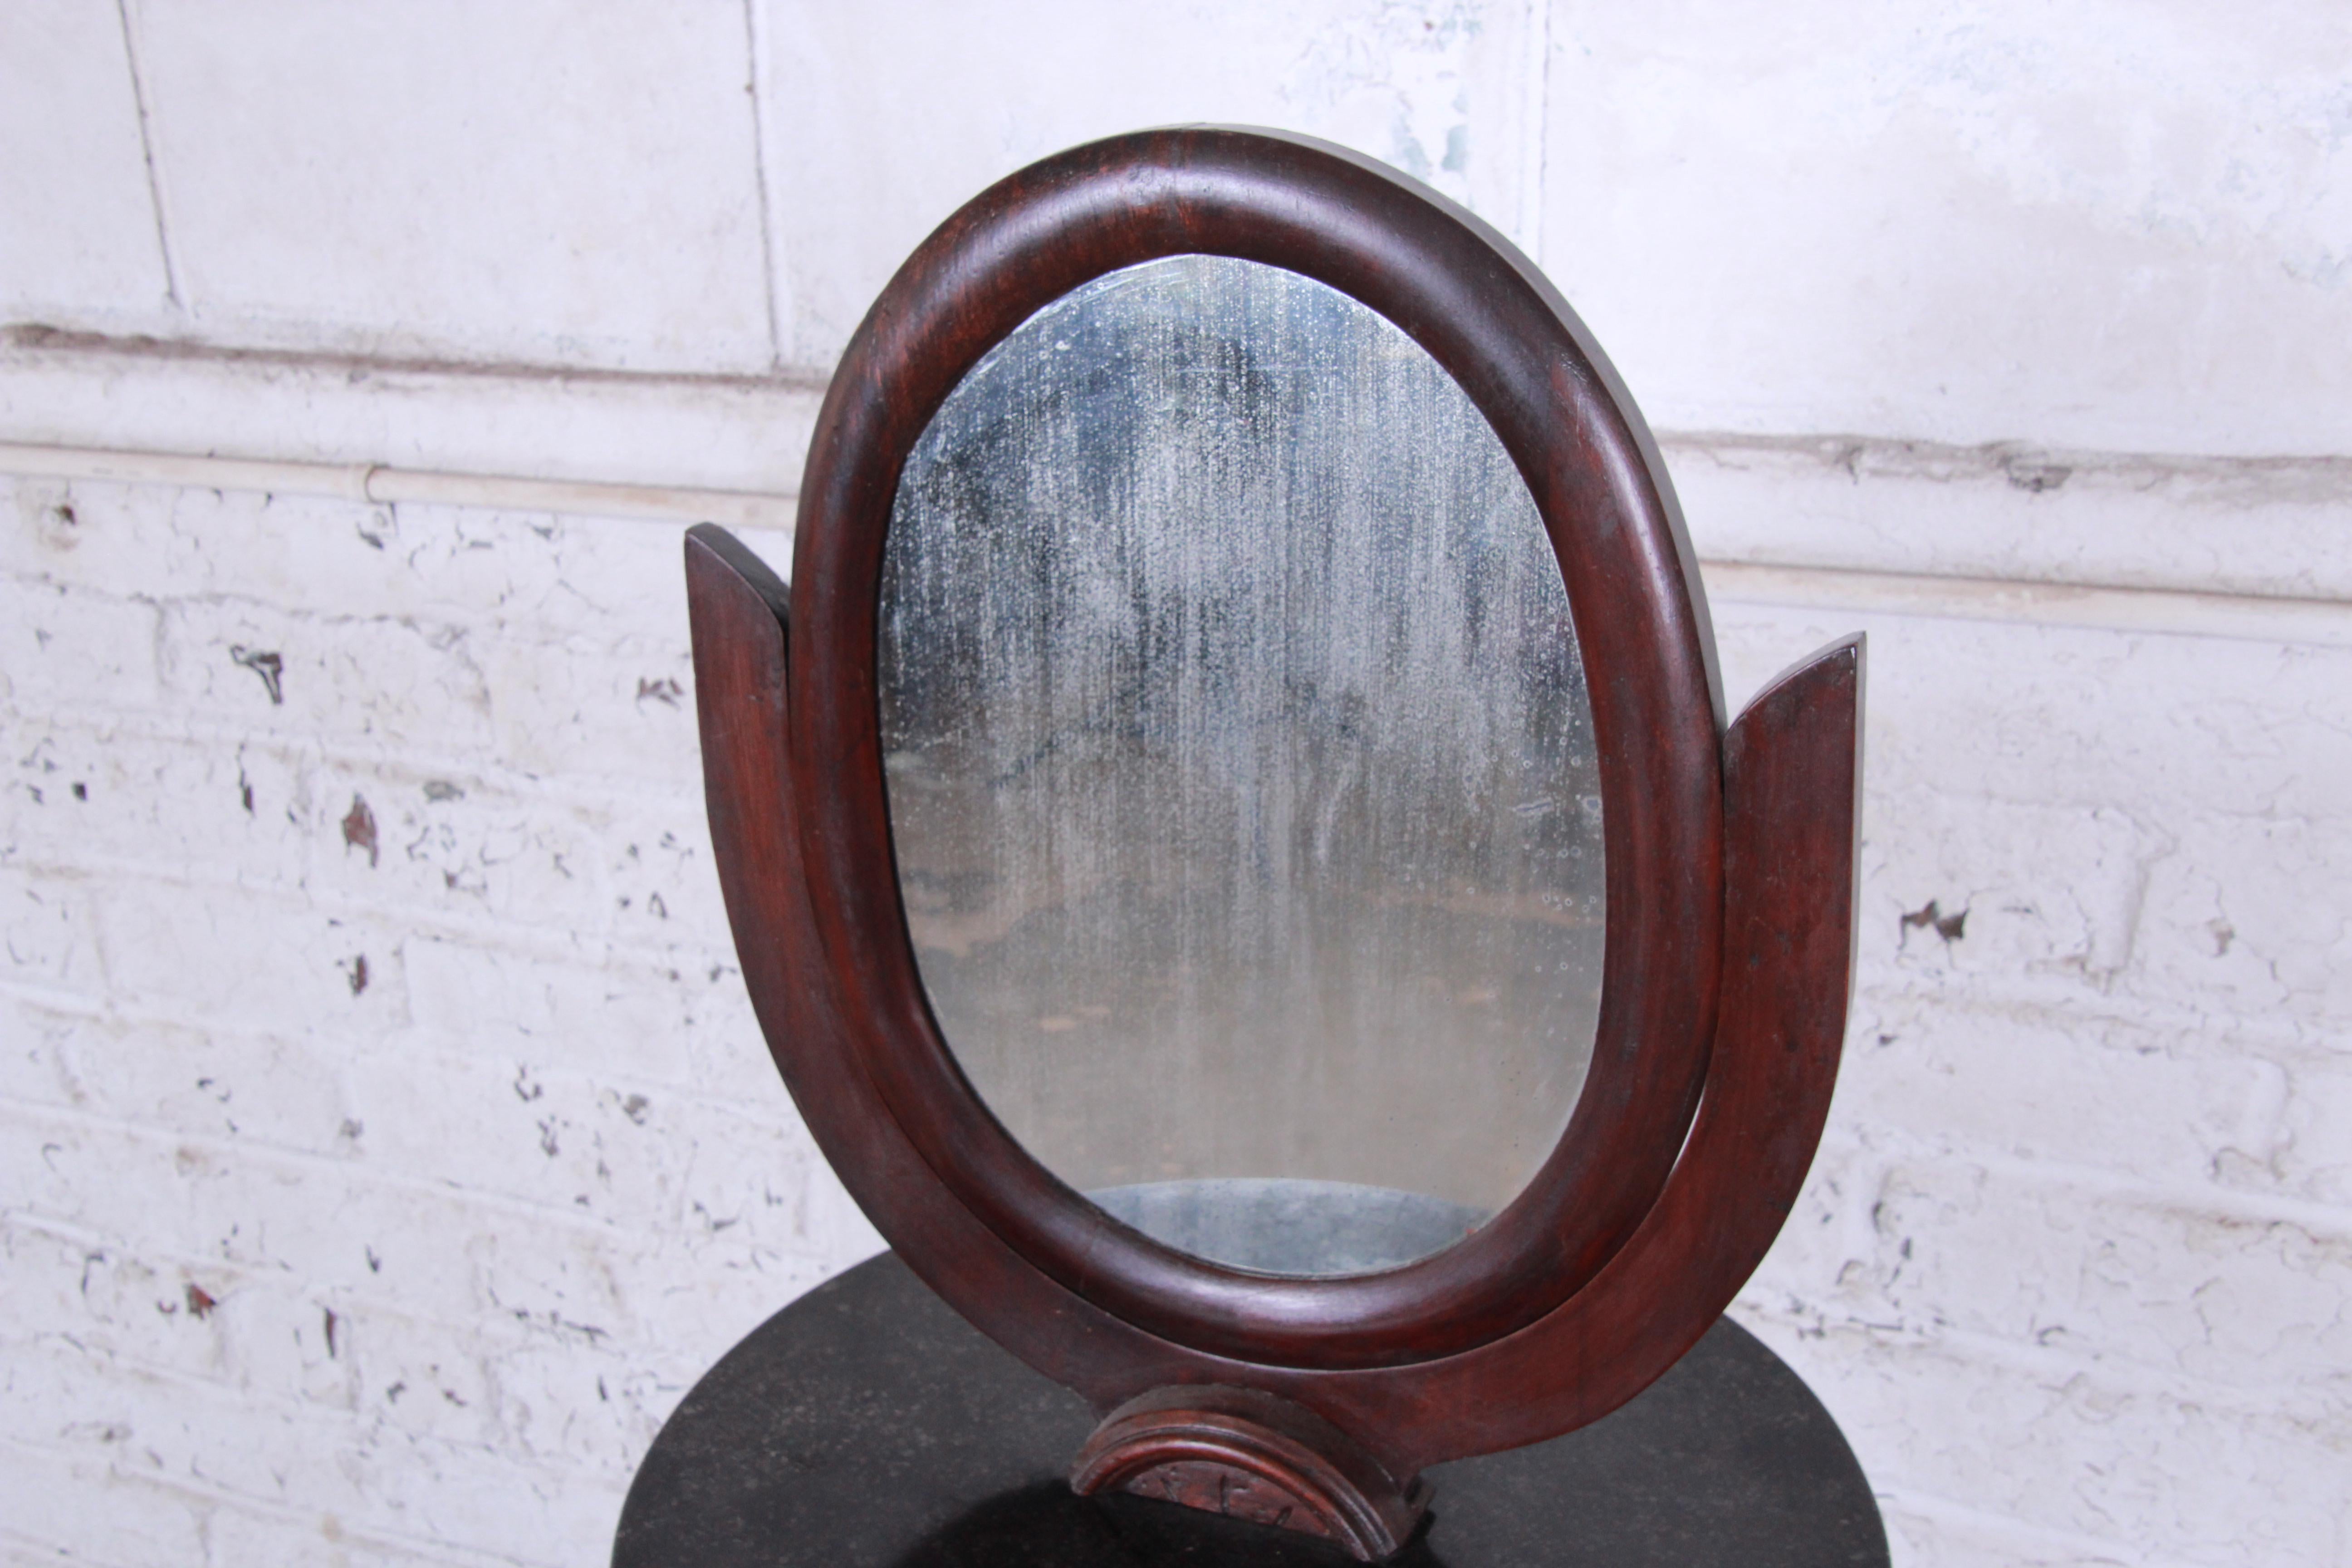 A unique 19th century Victorian mahogany mirrored shaving stand. It features an oval mirror on a round marble top with a single dovetailed drawer for storage. The stand rests on original casters. Very good original vintage condition.

The stand